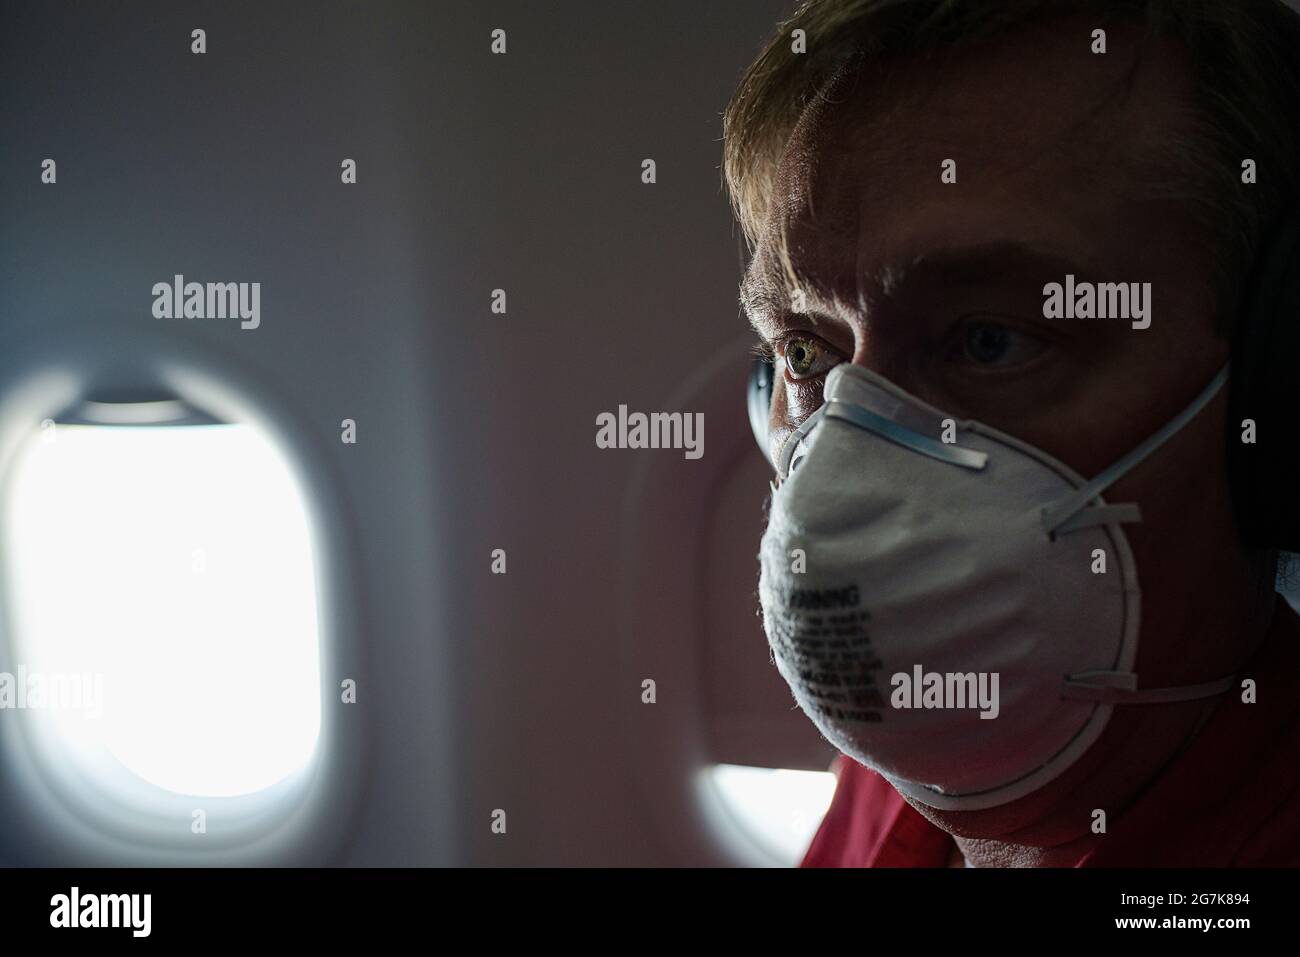 A man flying on April 25, 2020 during the COVID pandemic. Stock Photo